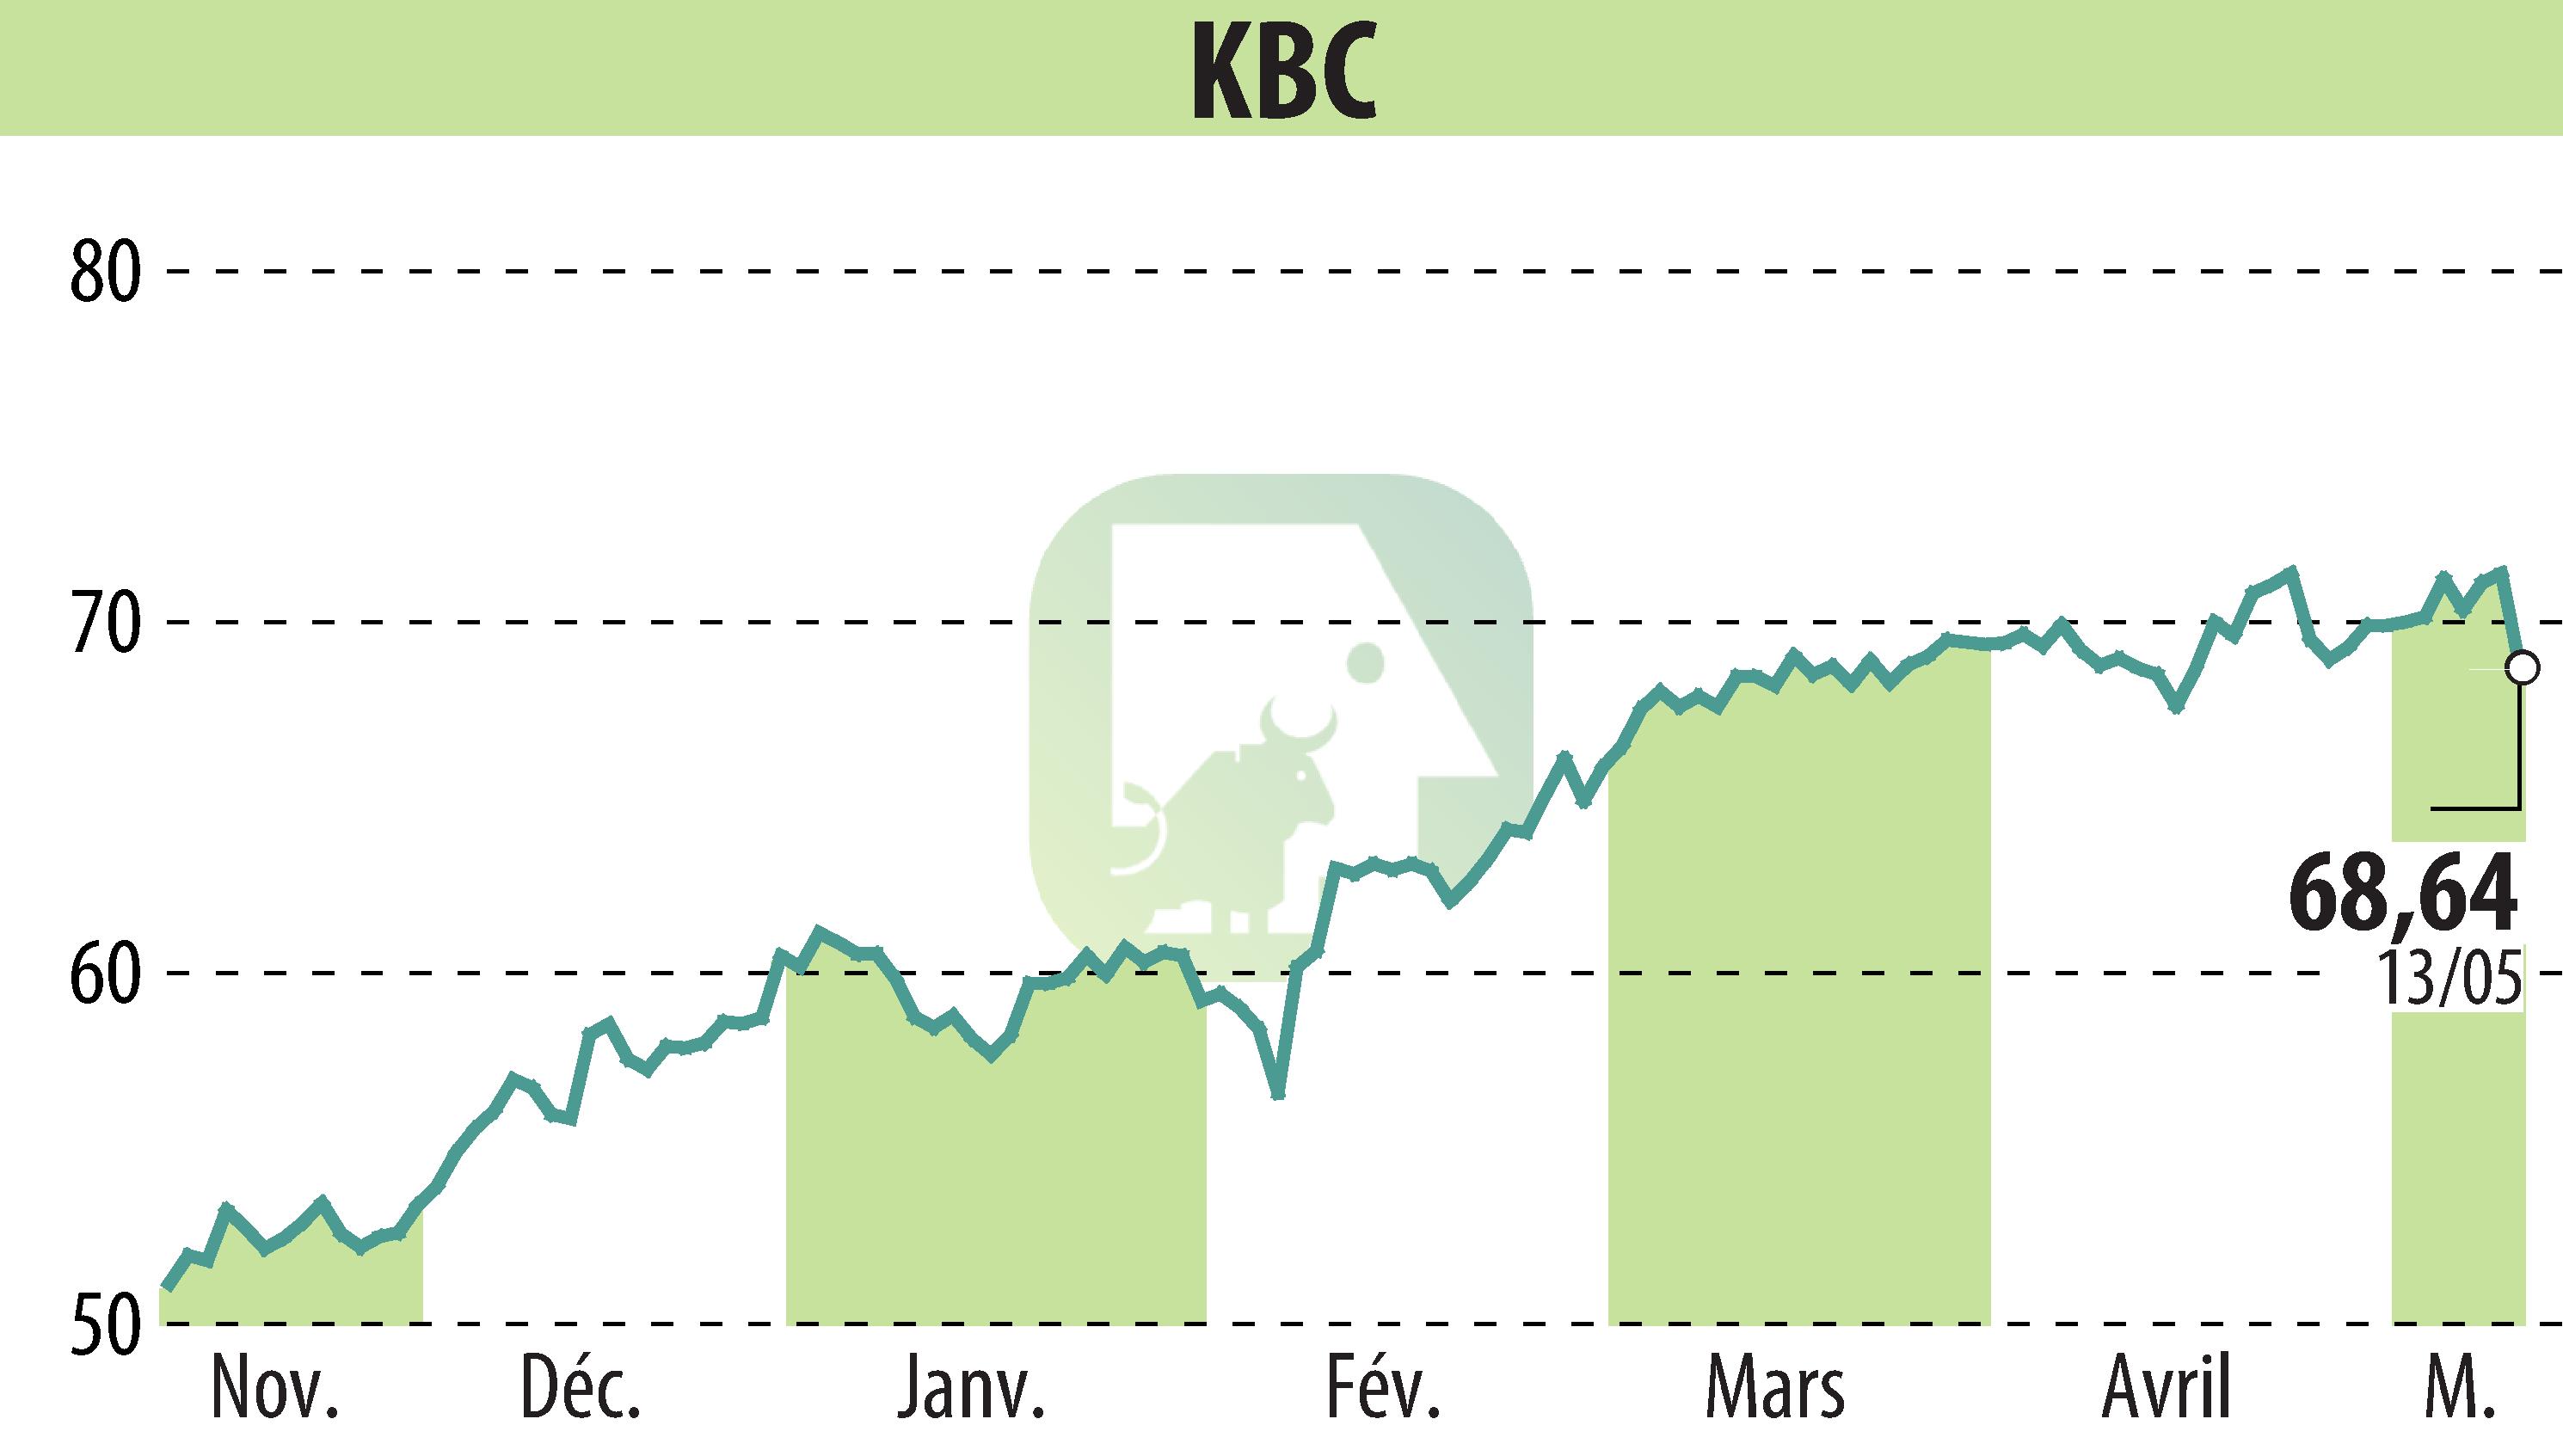 Stock price chart of KBC (EBR:KBC) showing fluctuations.